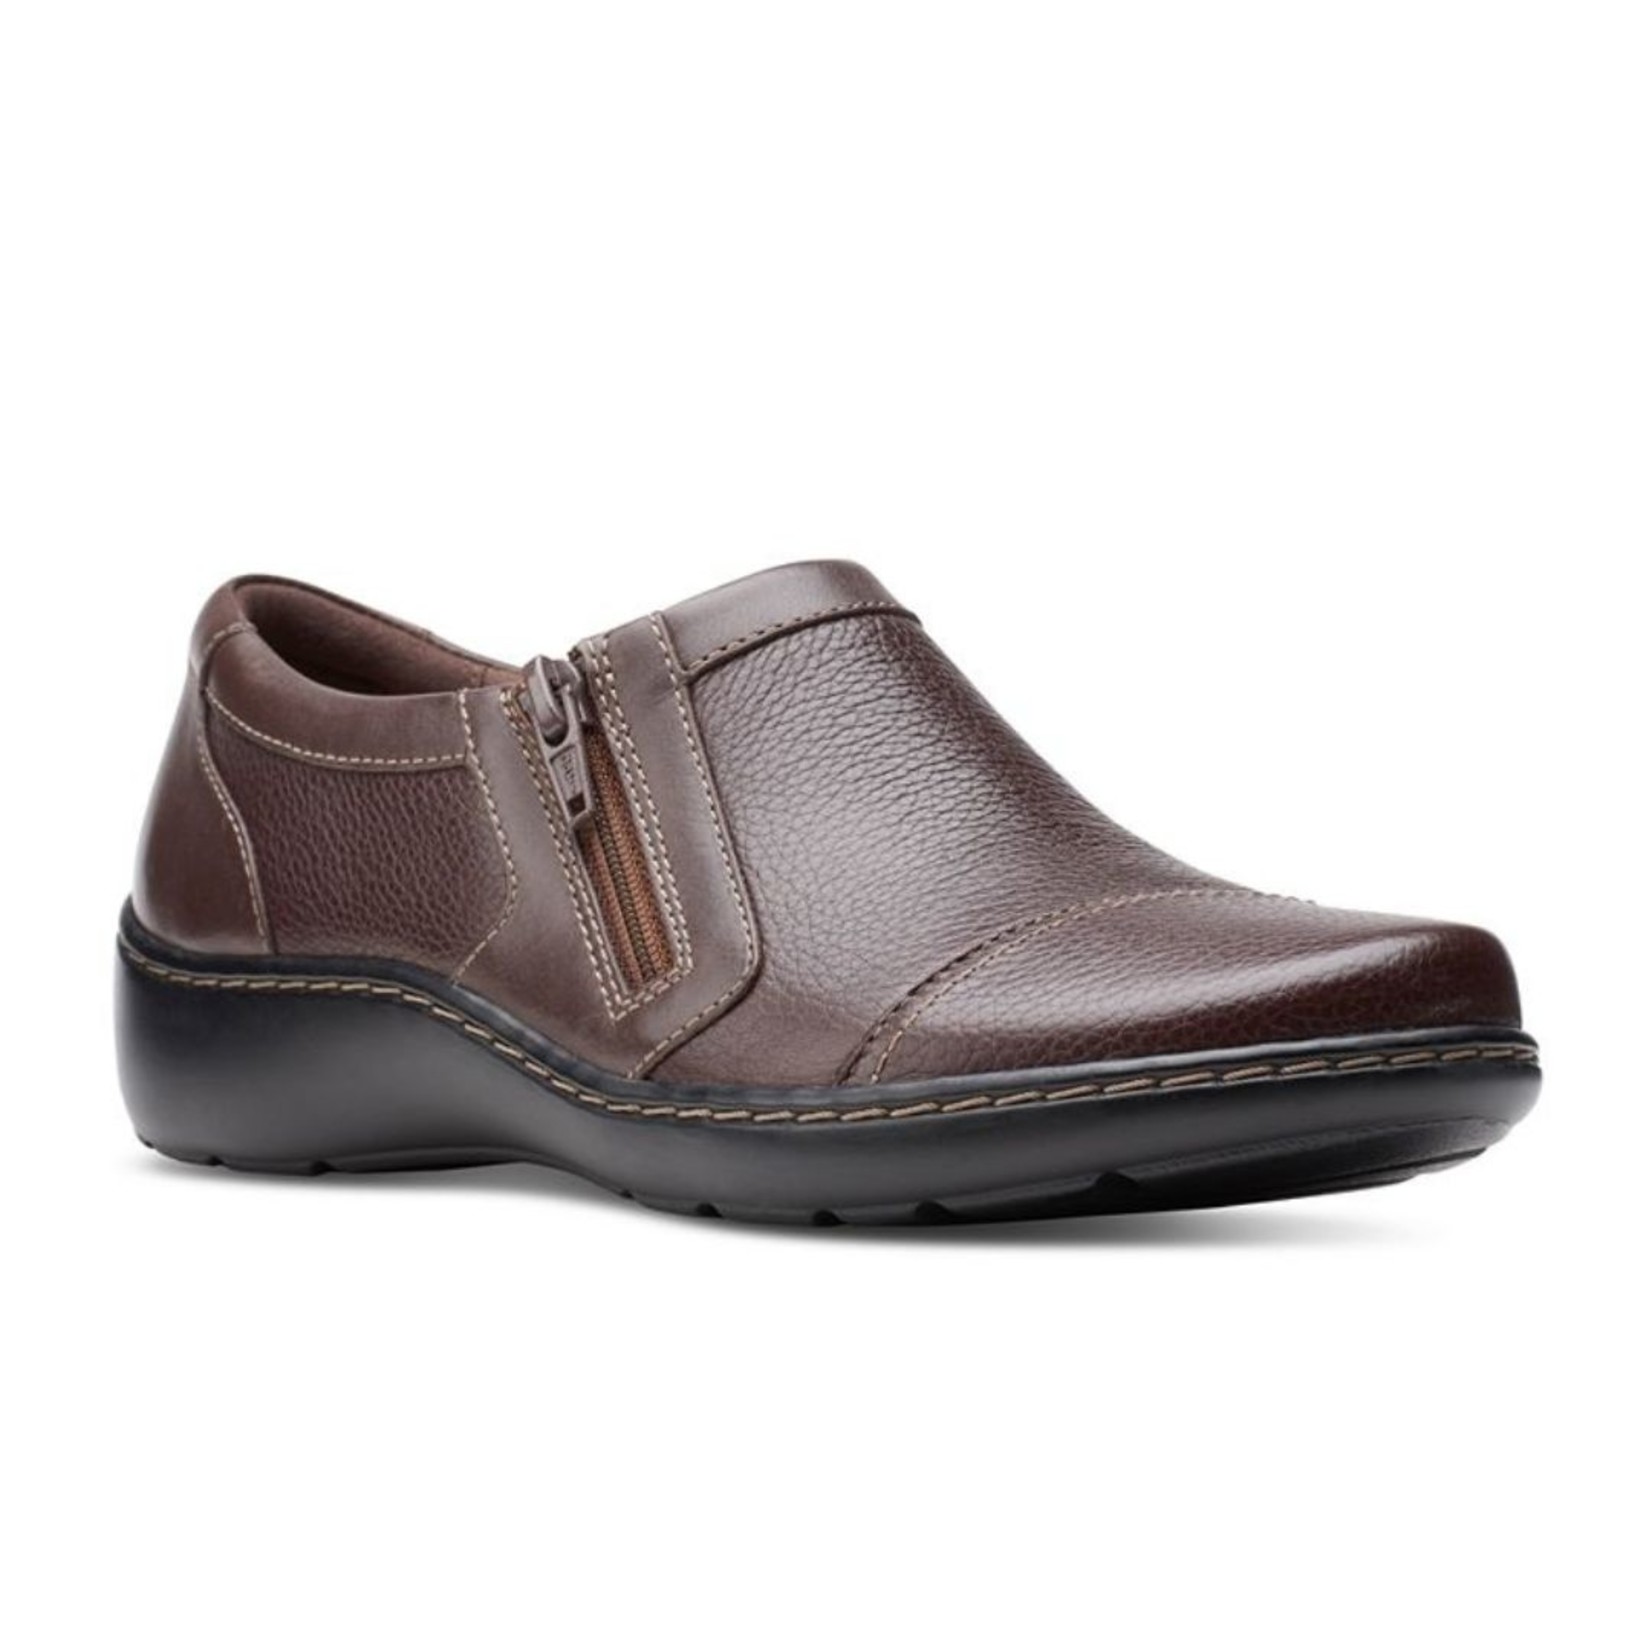 Clarks Clarks Cora Giny Women’s Slip-On Shoes